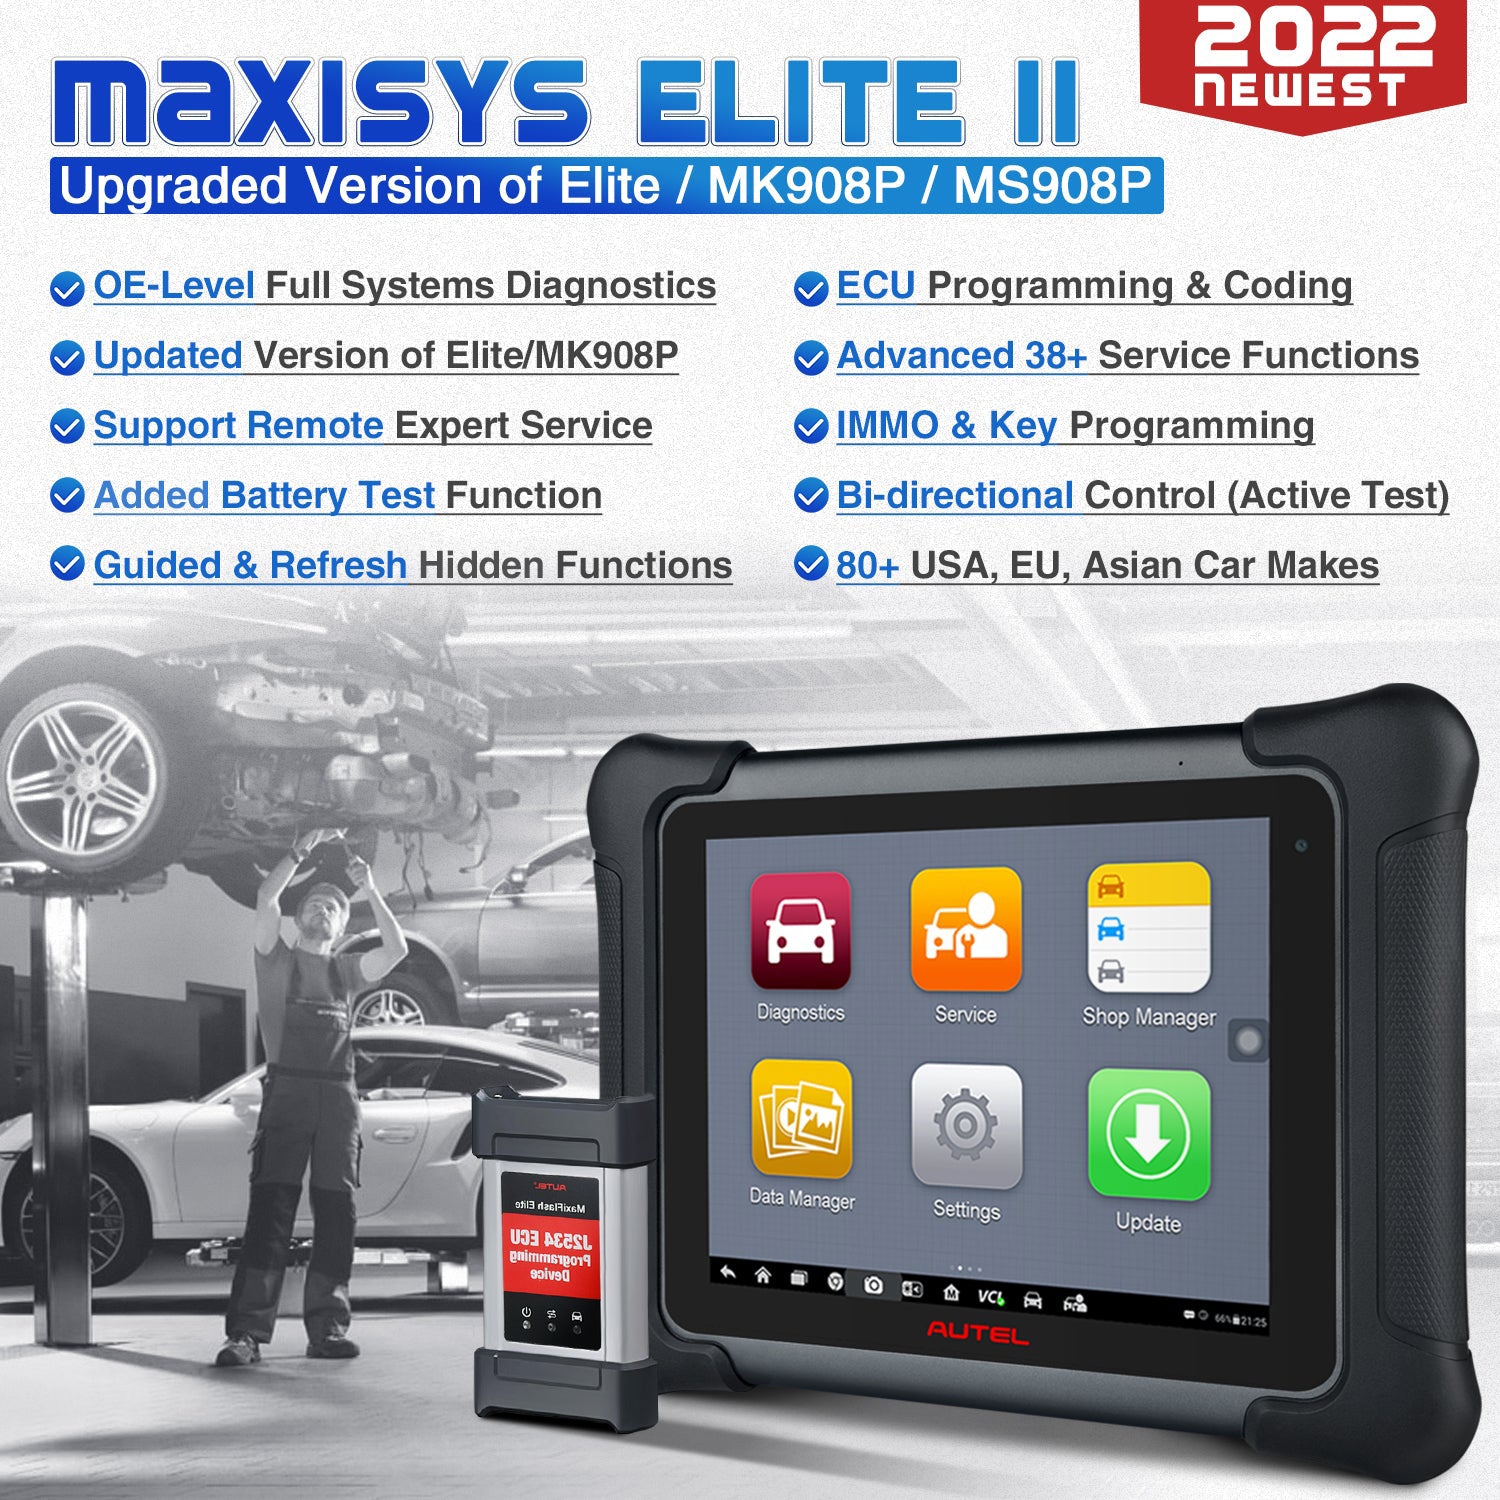 Autel Maxisys Elite II Scanner ECU Coding & Programming Diagnostic Tool Features Overview